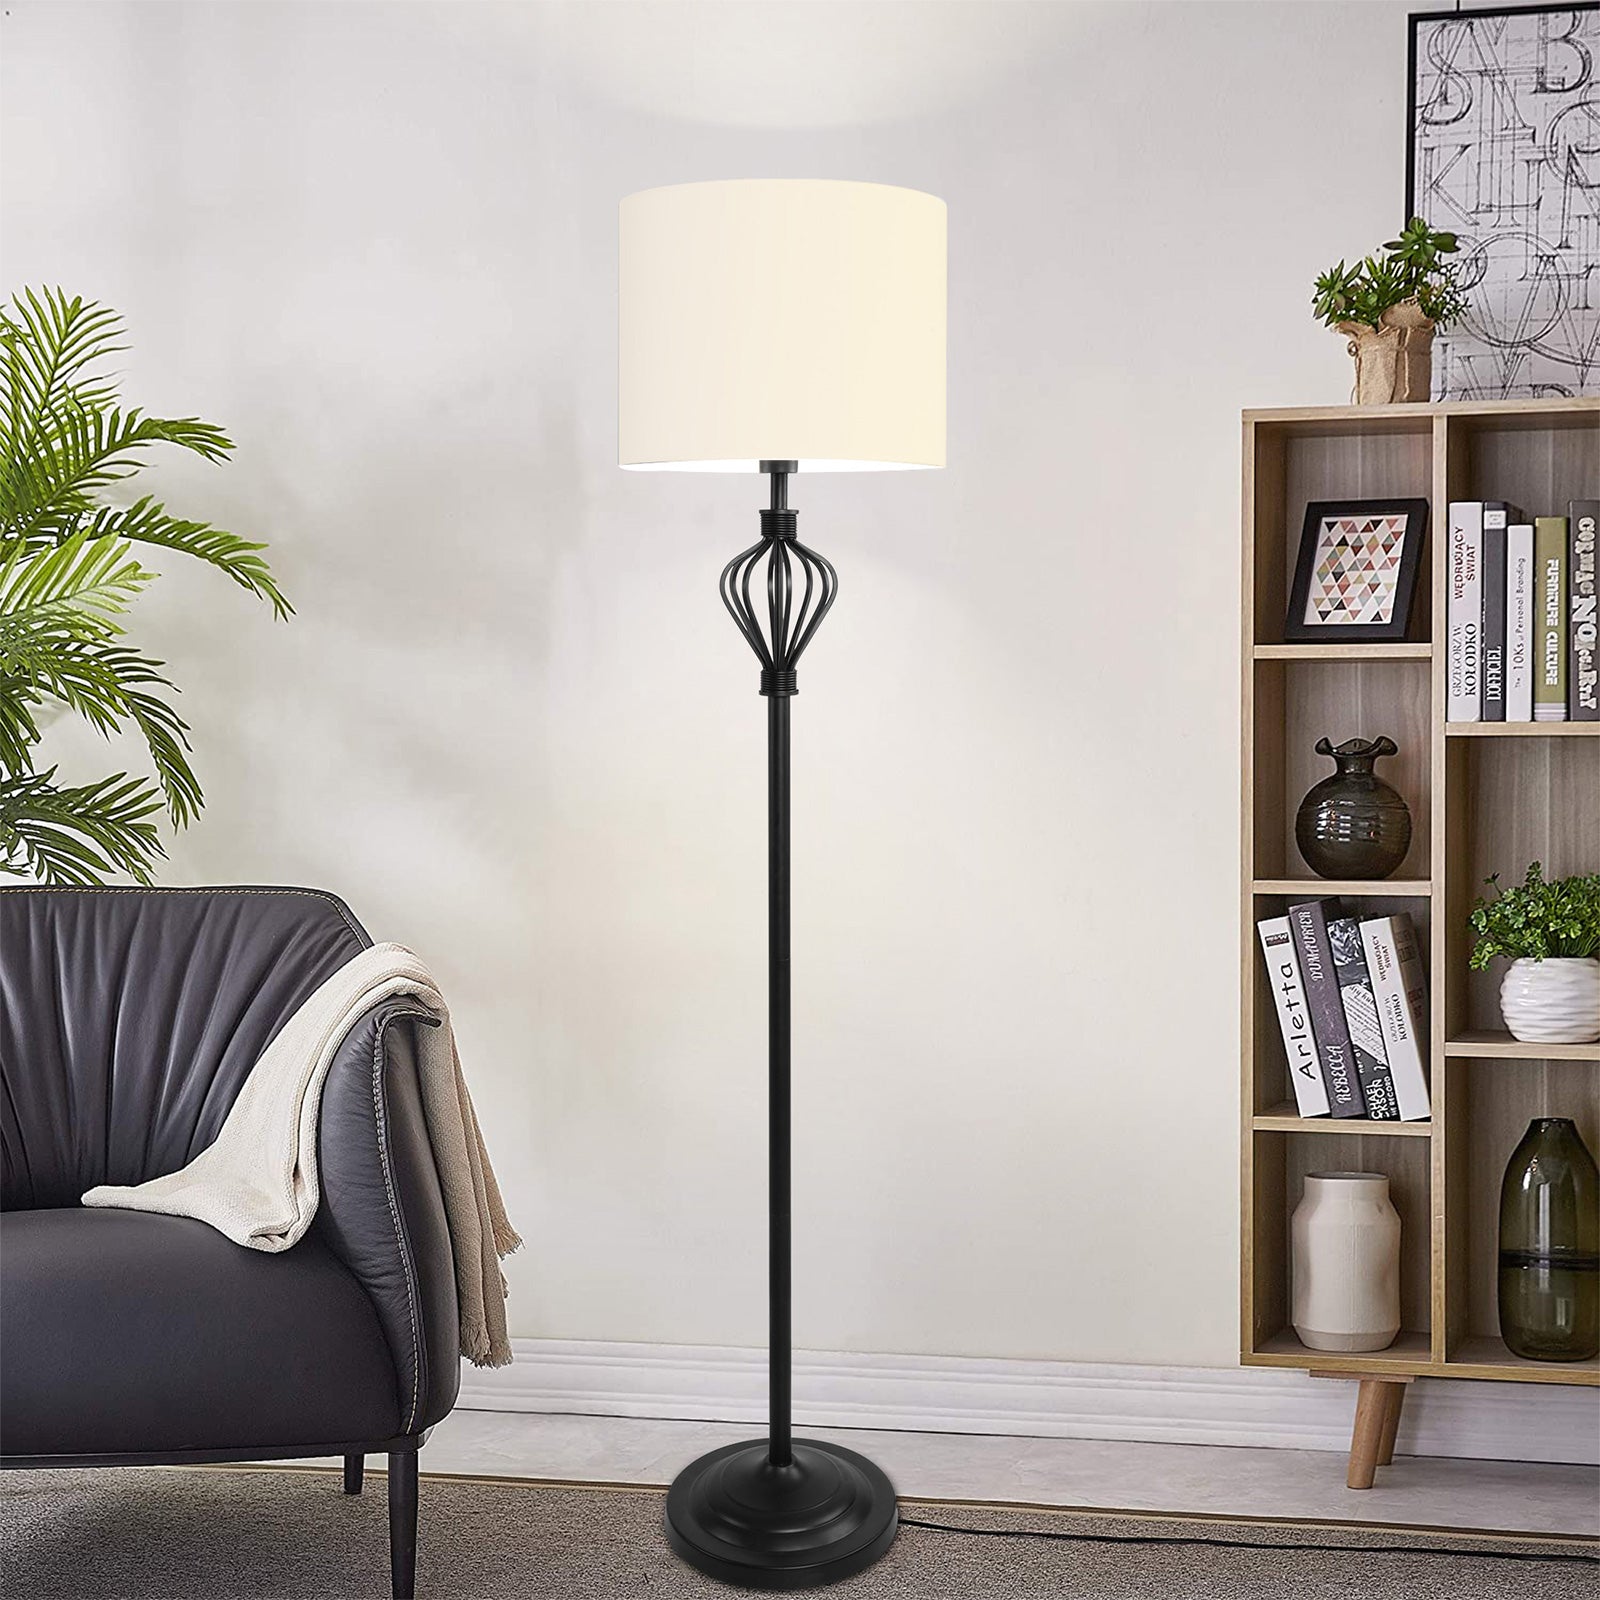 Standing Floor Lamp with 8W LED Bulb Foot Switch Fabric Lamp Shade Tall Stand Up Floor Lamp, Black and White